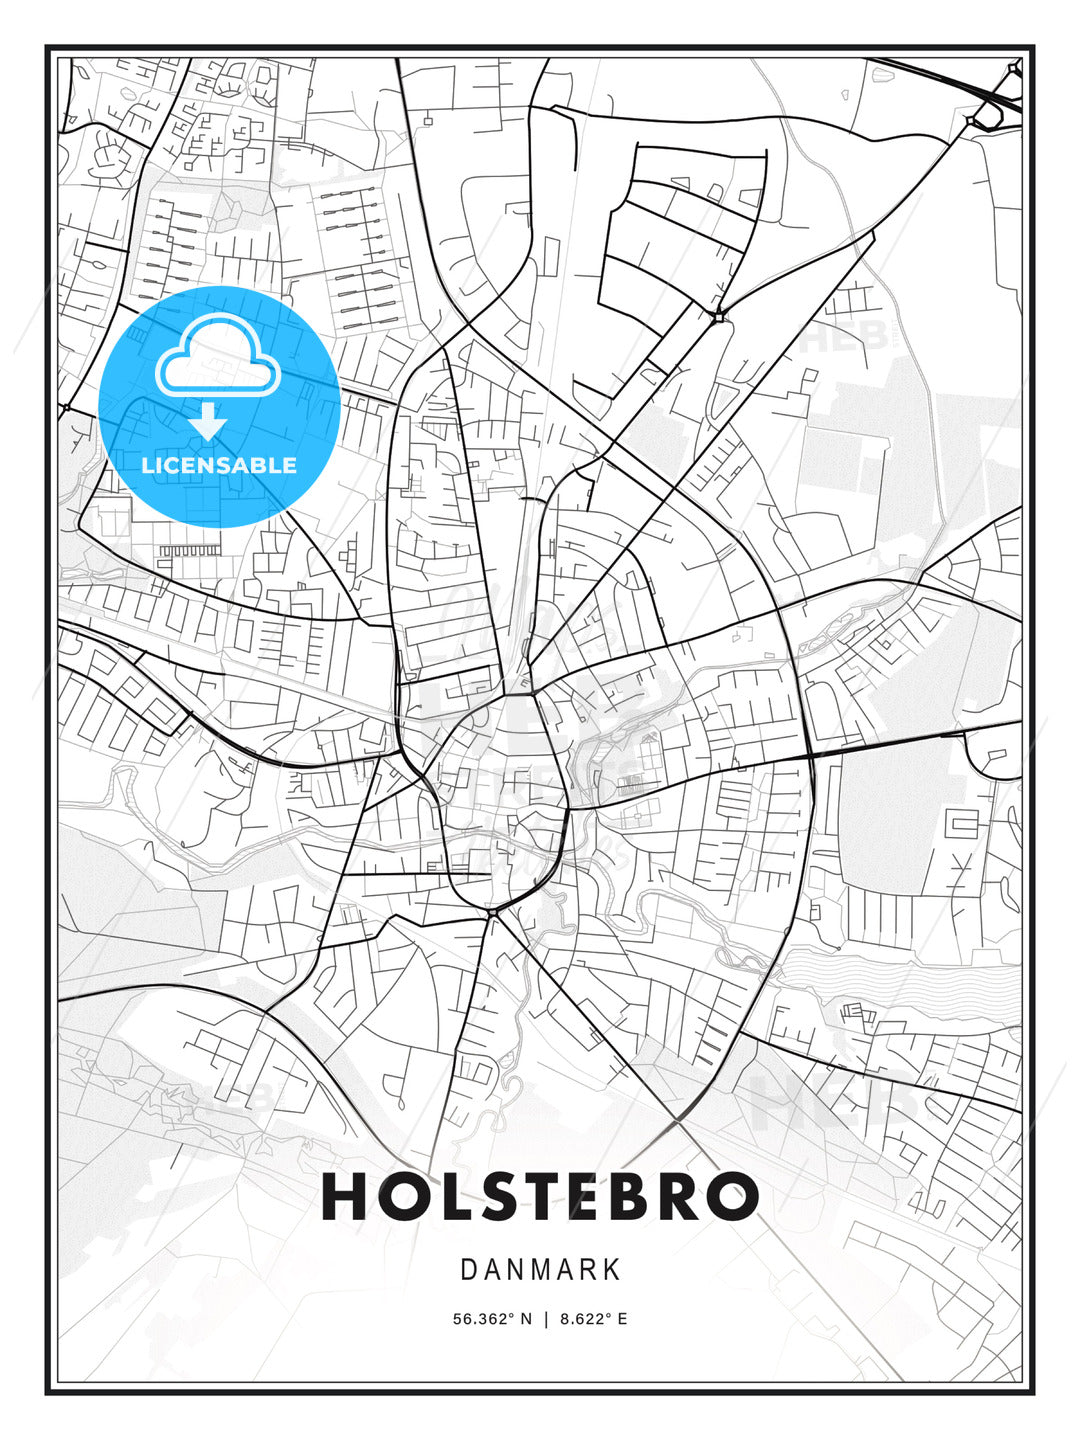 Holstebro, Denmark, Modern Print Template in Various Formats - HEBSTREITS Sketches